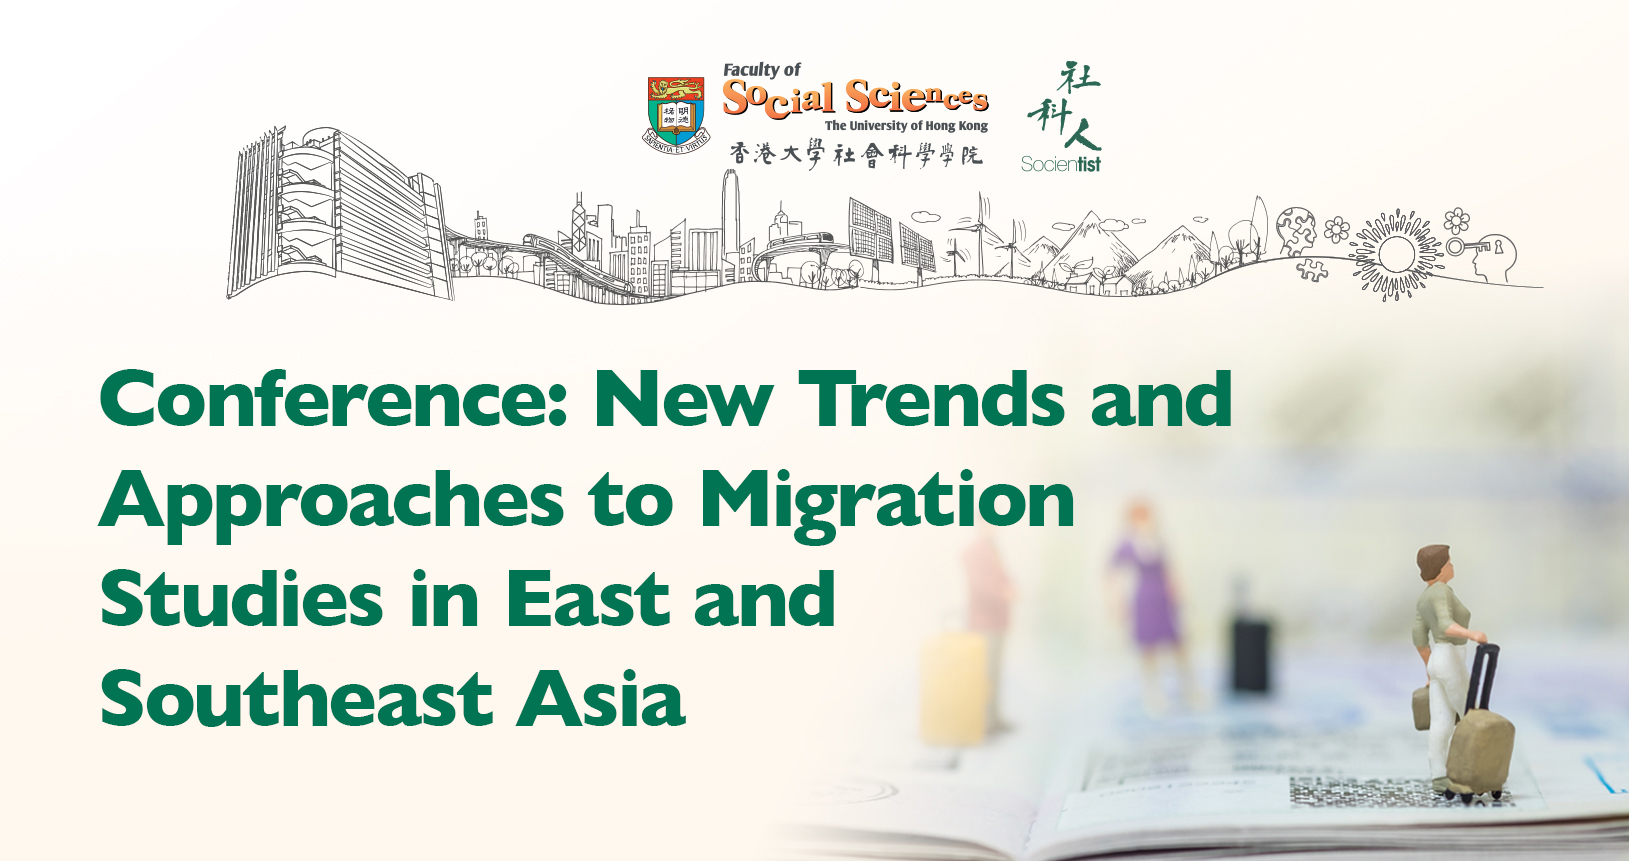 New Trends and Approaches to Migration Studies in East and Southeast Asia